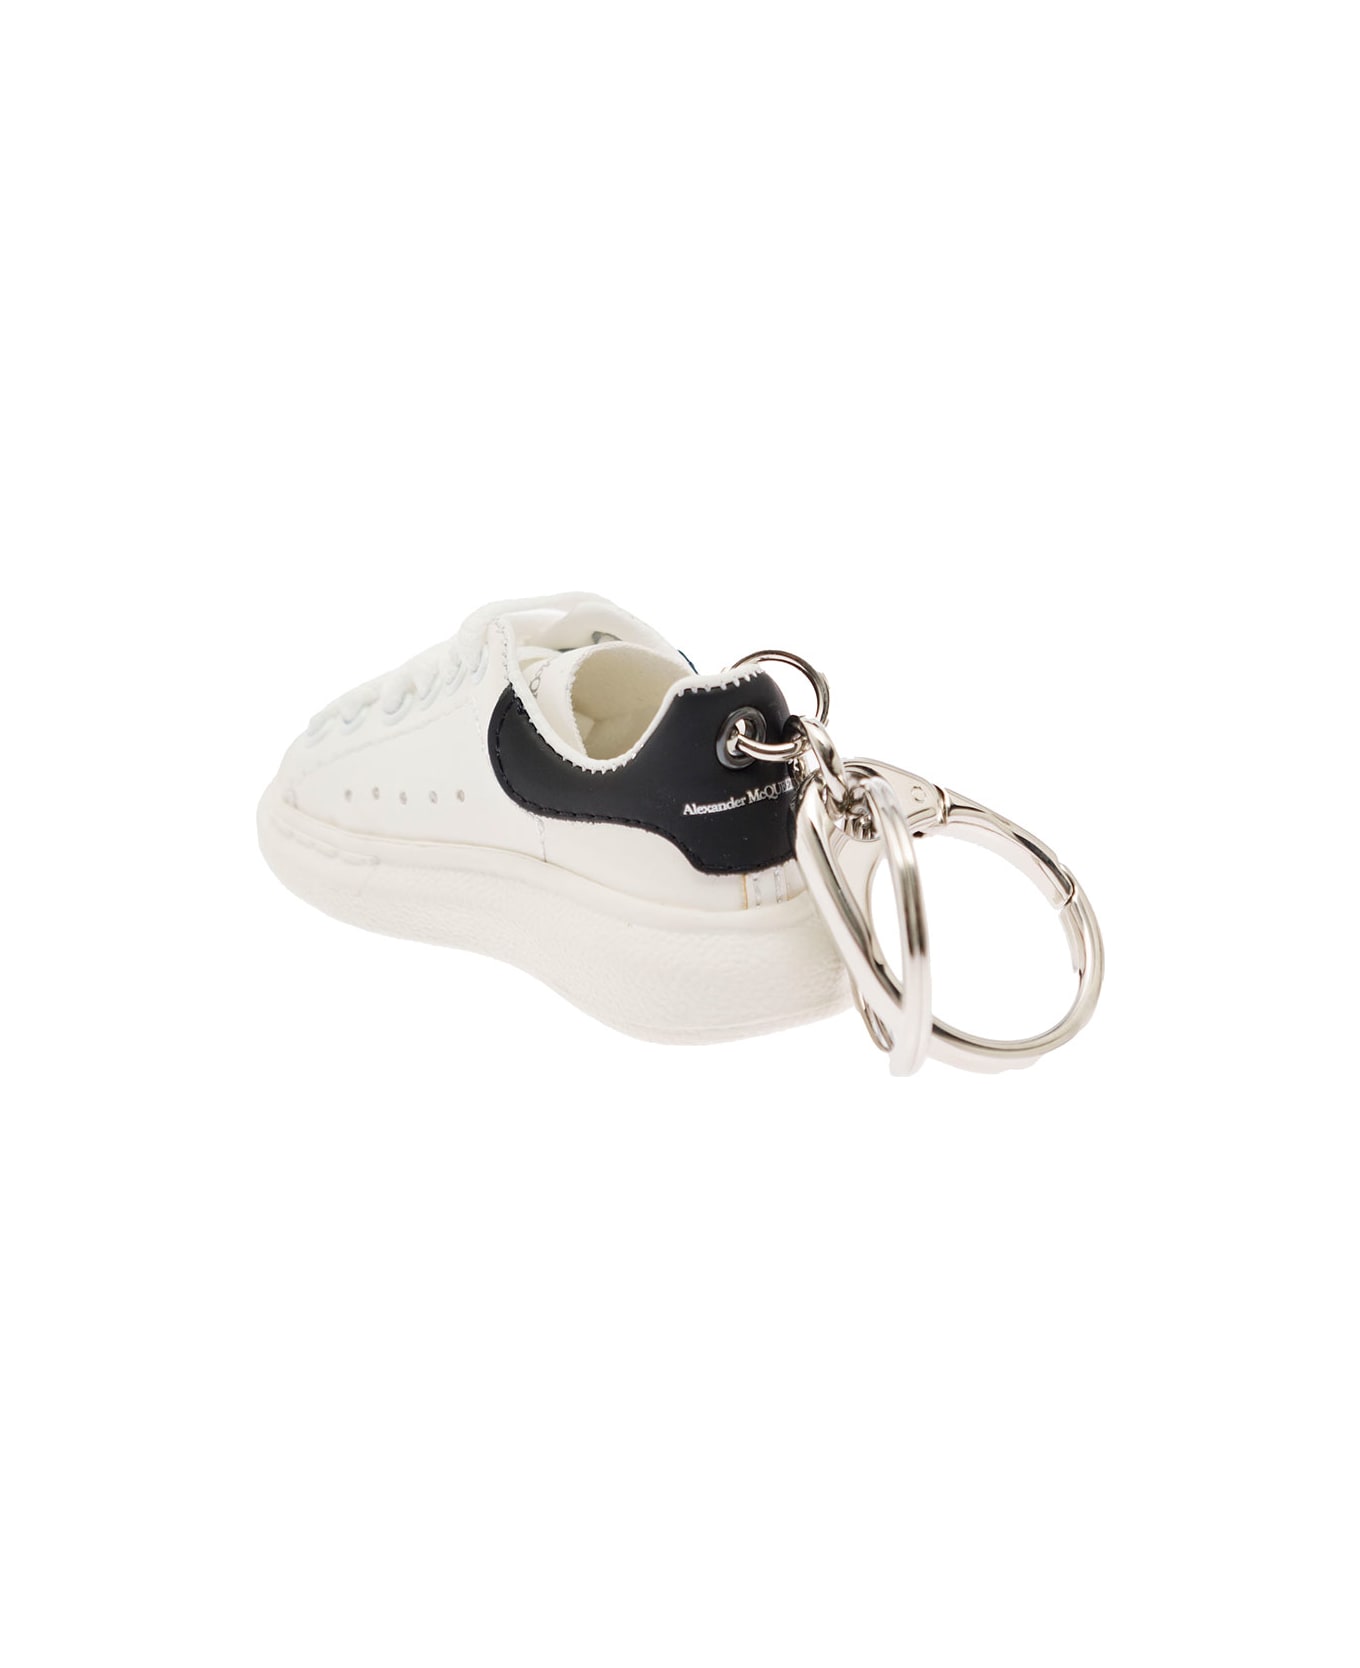 Alexander McQueen White And Silver Chunky Sole Sneaker Keyring - White